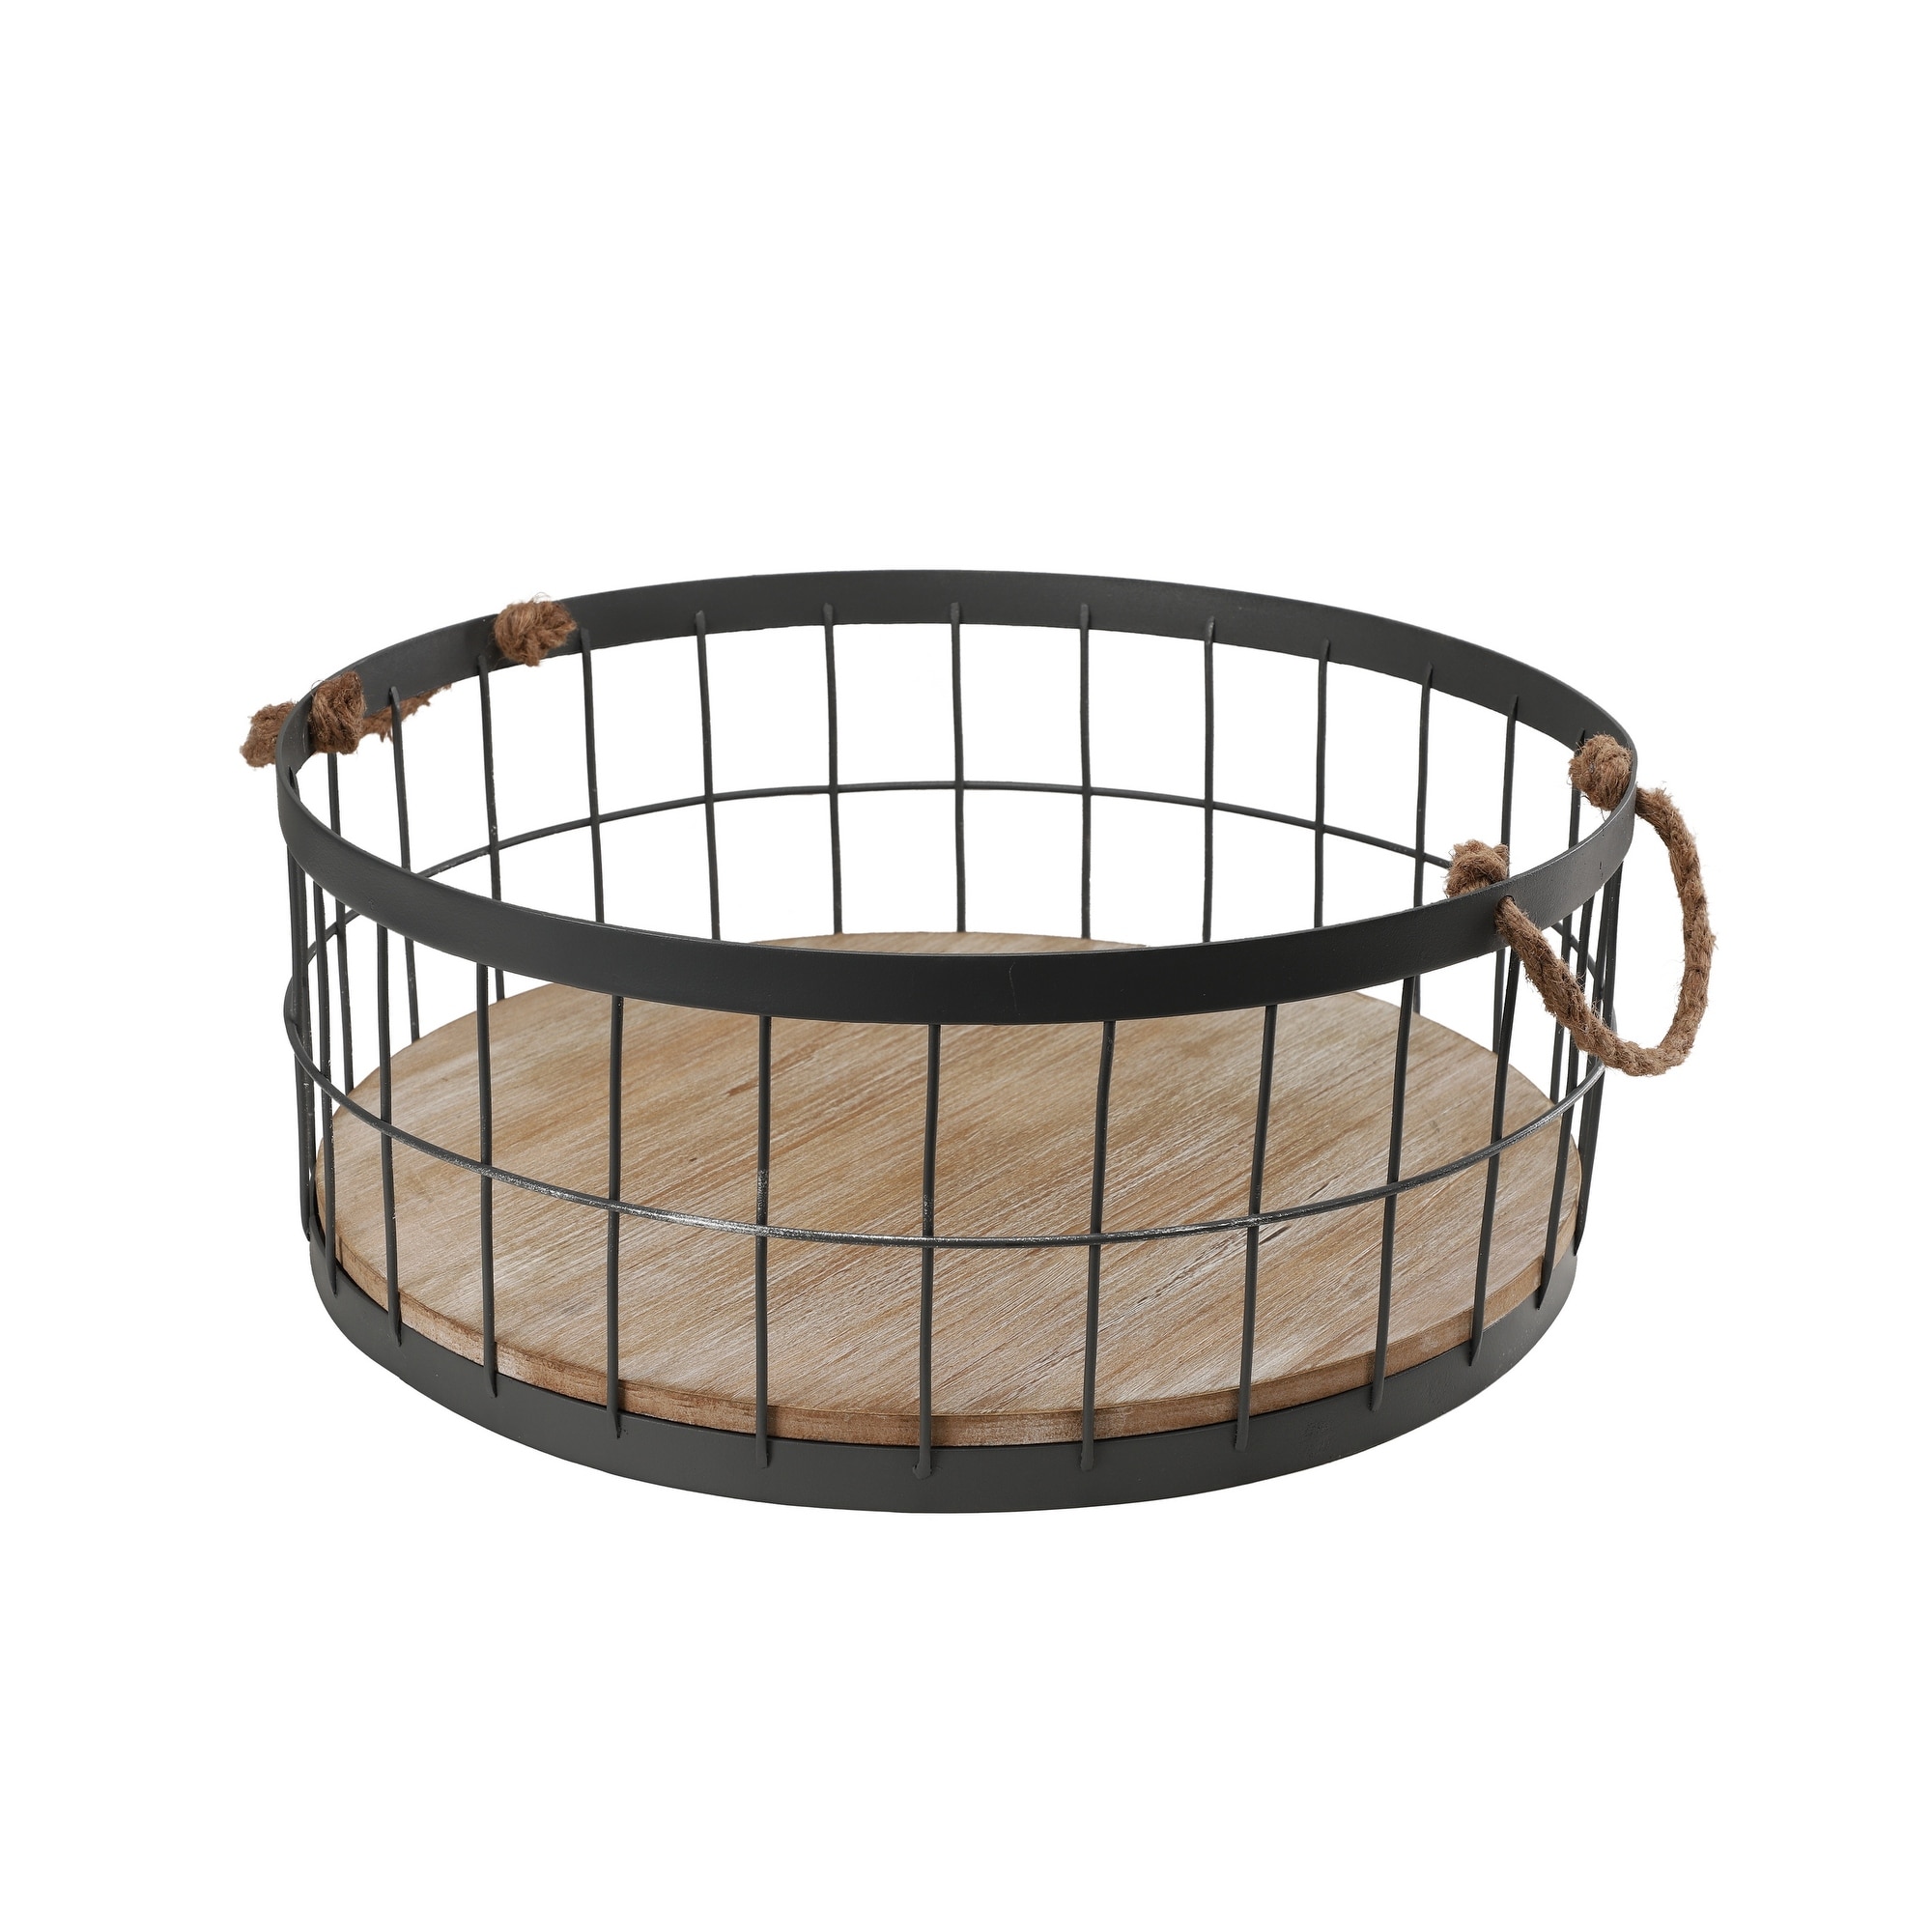 https://ak1.ostkcdn.com/images/products/is/images/direct/d064ab56081ece816e140ab24c2d12eee7a15373/Set-of-2-Wire-Baskets-with-Wooded-Base-and-Handles.jpg